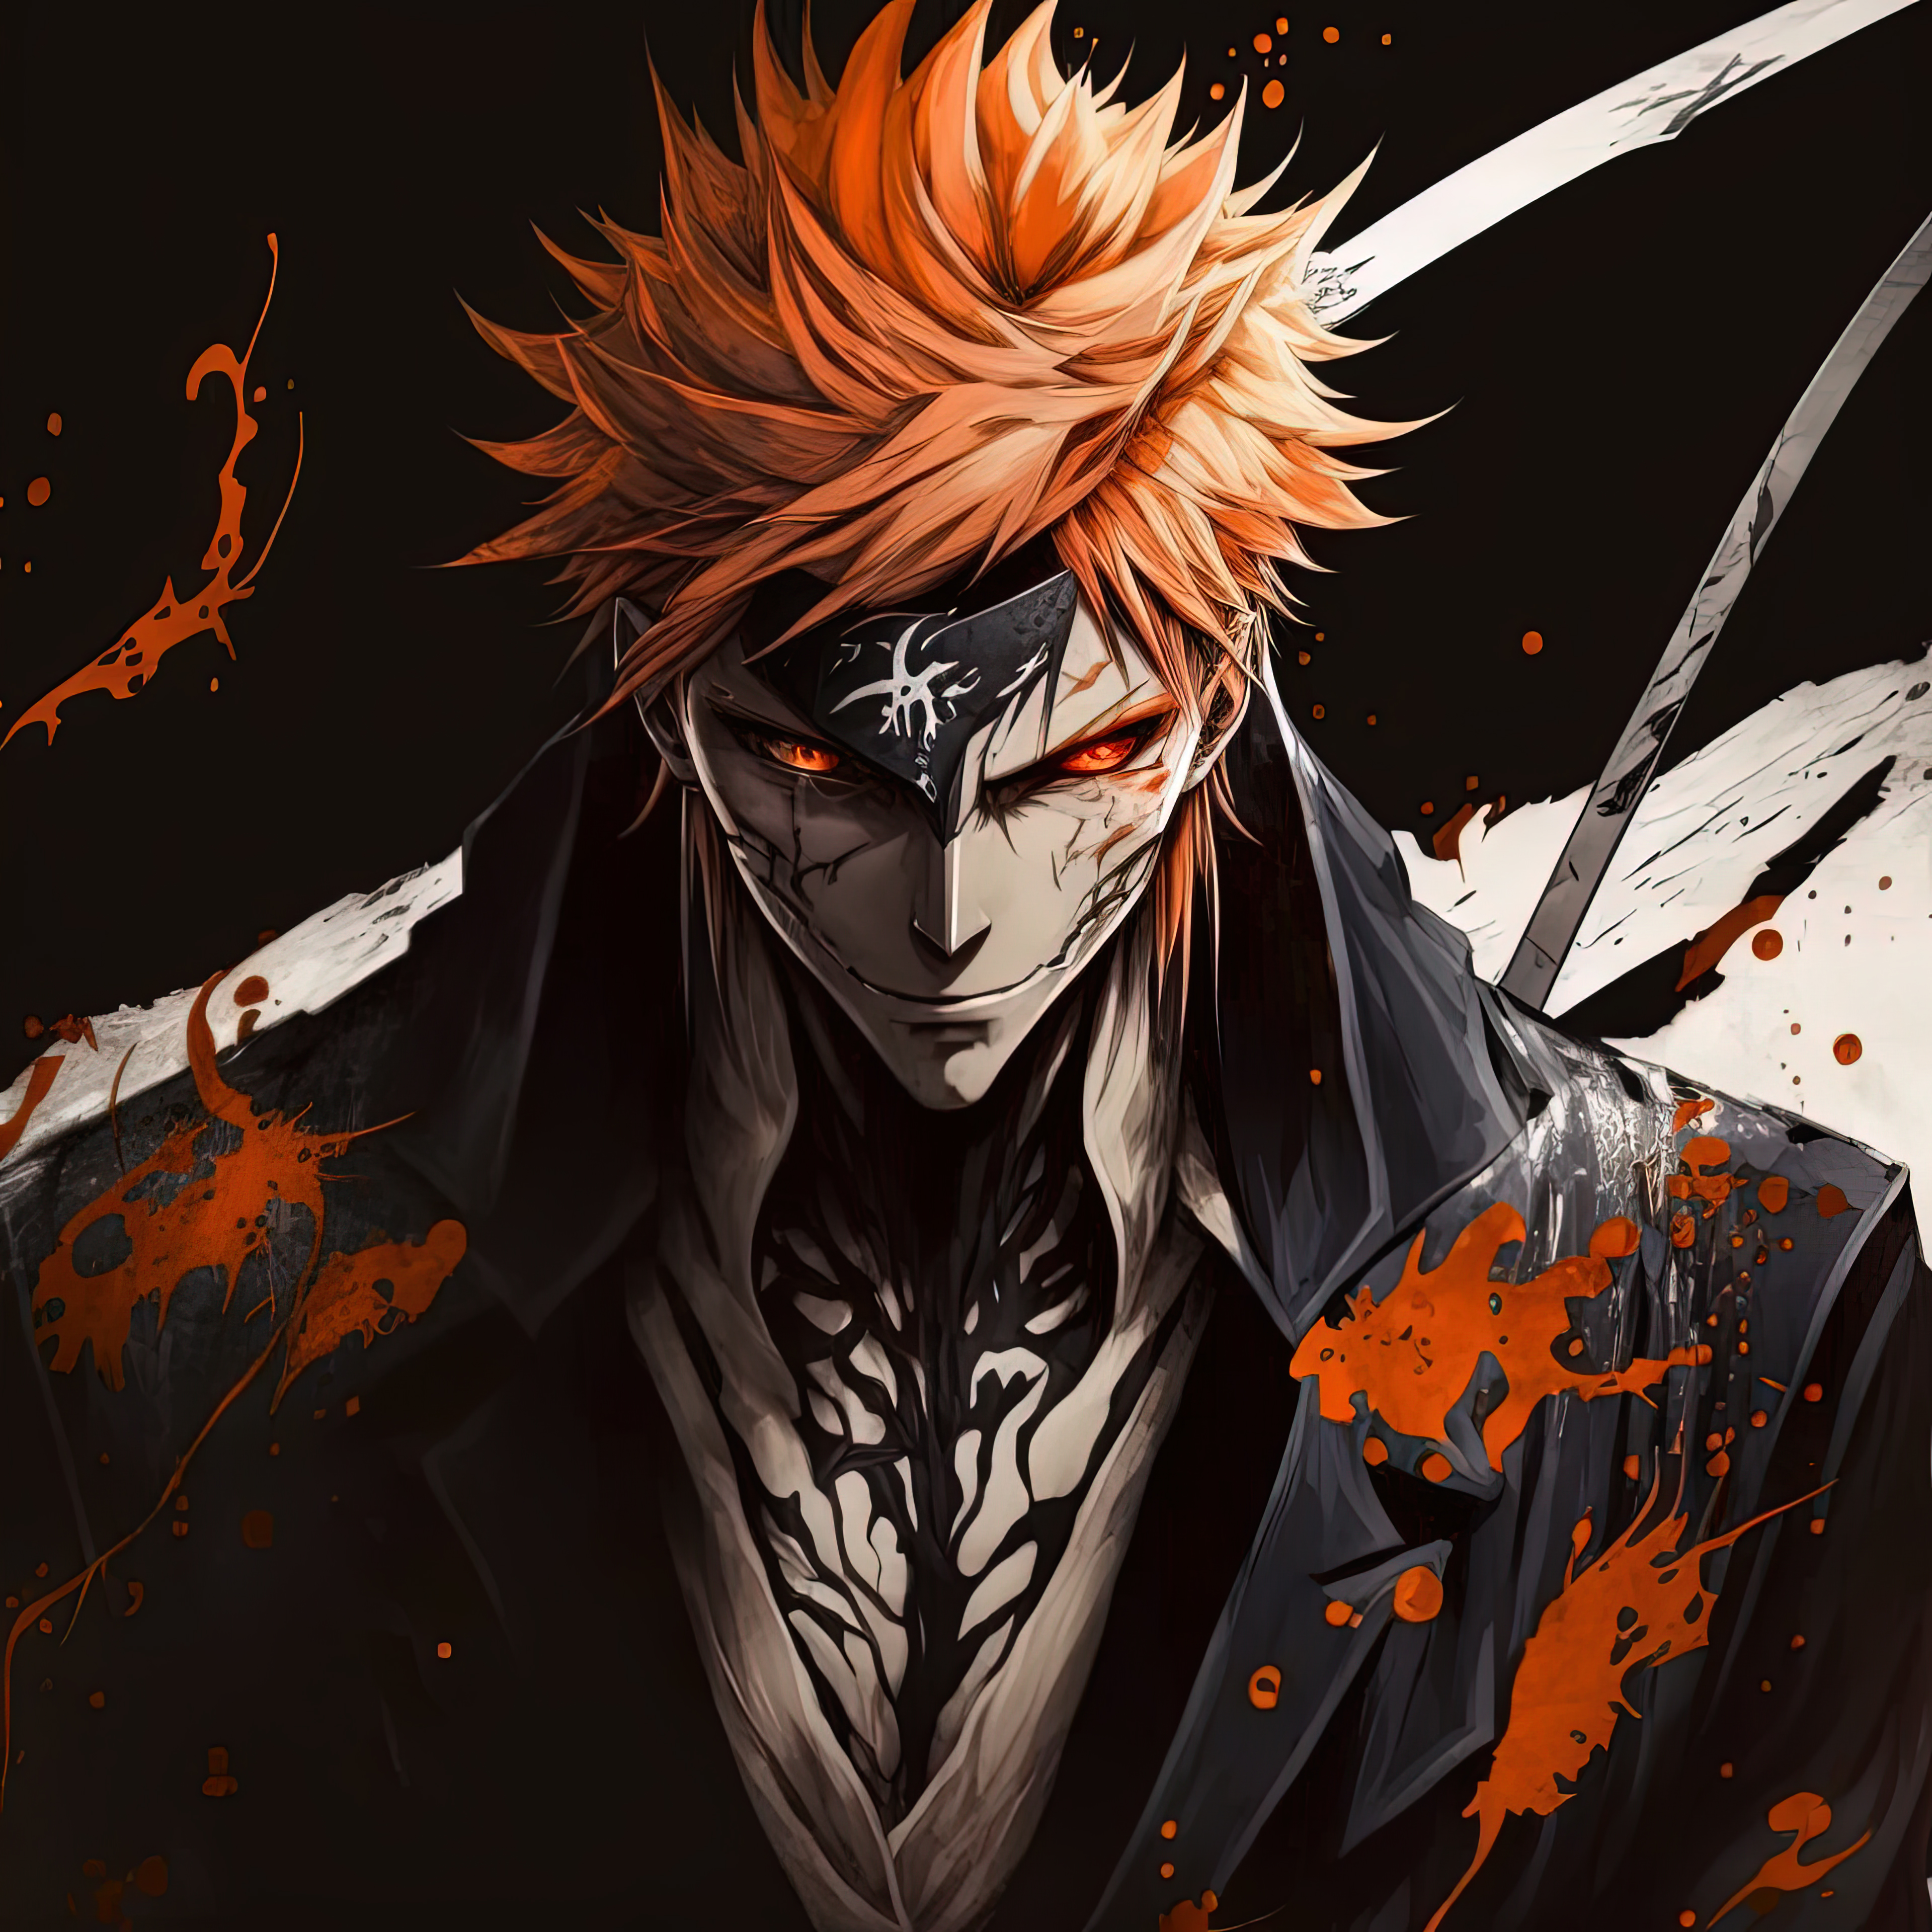 Bleach petition: Bring back the anime